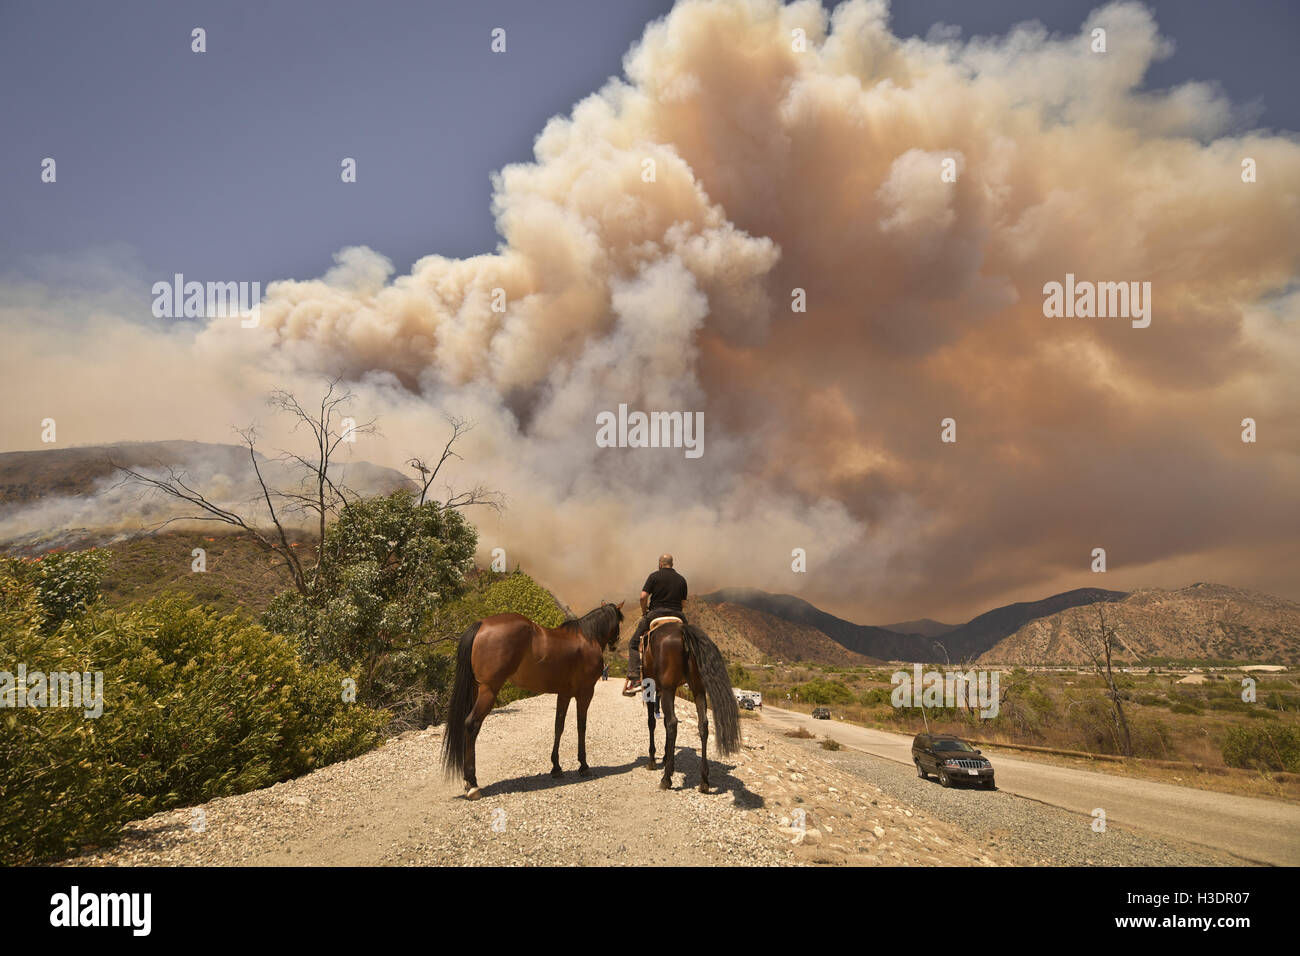 San Gabriel, CA, USA. 6th Oct, 2016. The Fish Fire burns in the Angeles National Forest on Monday, June 20th, 2016. The Fish Fire began amidst record triple digit temperatures and burned near homes north of the 210 Freeway. The Reservoir Fire started nearby, and both fires were managed as the San Gabriel Complex. In total the two fires burned 5,399 acres and over 1,000 homes were evacuated. © Stuart Palley/ZUMA Wire/Alamy Live News Stock Photo